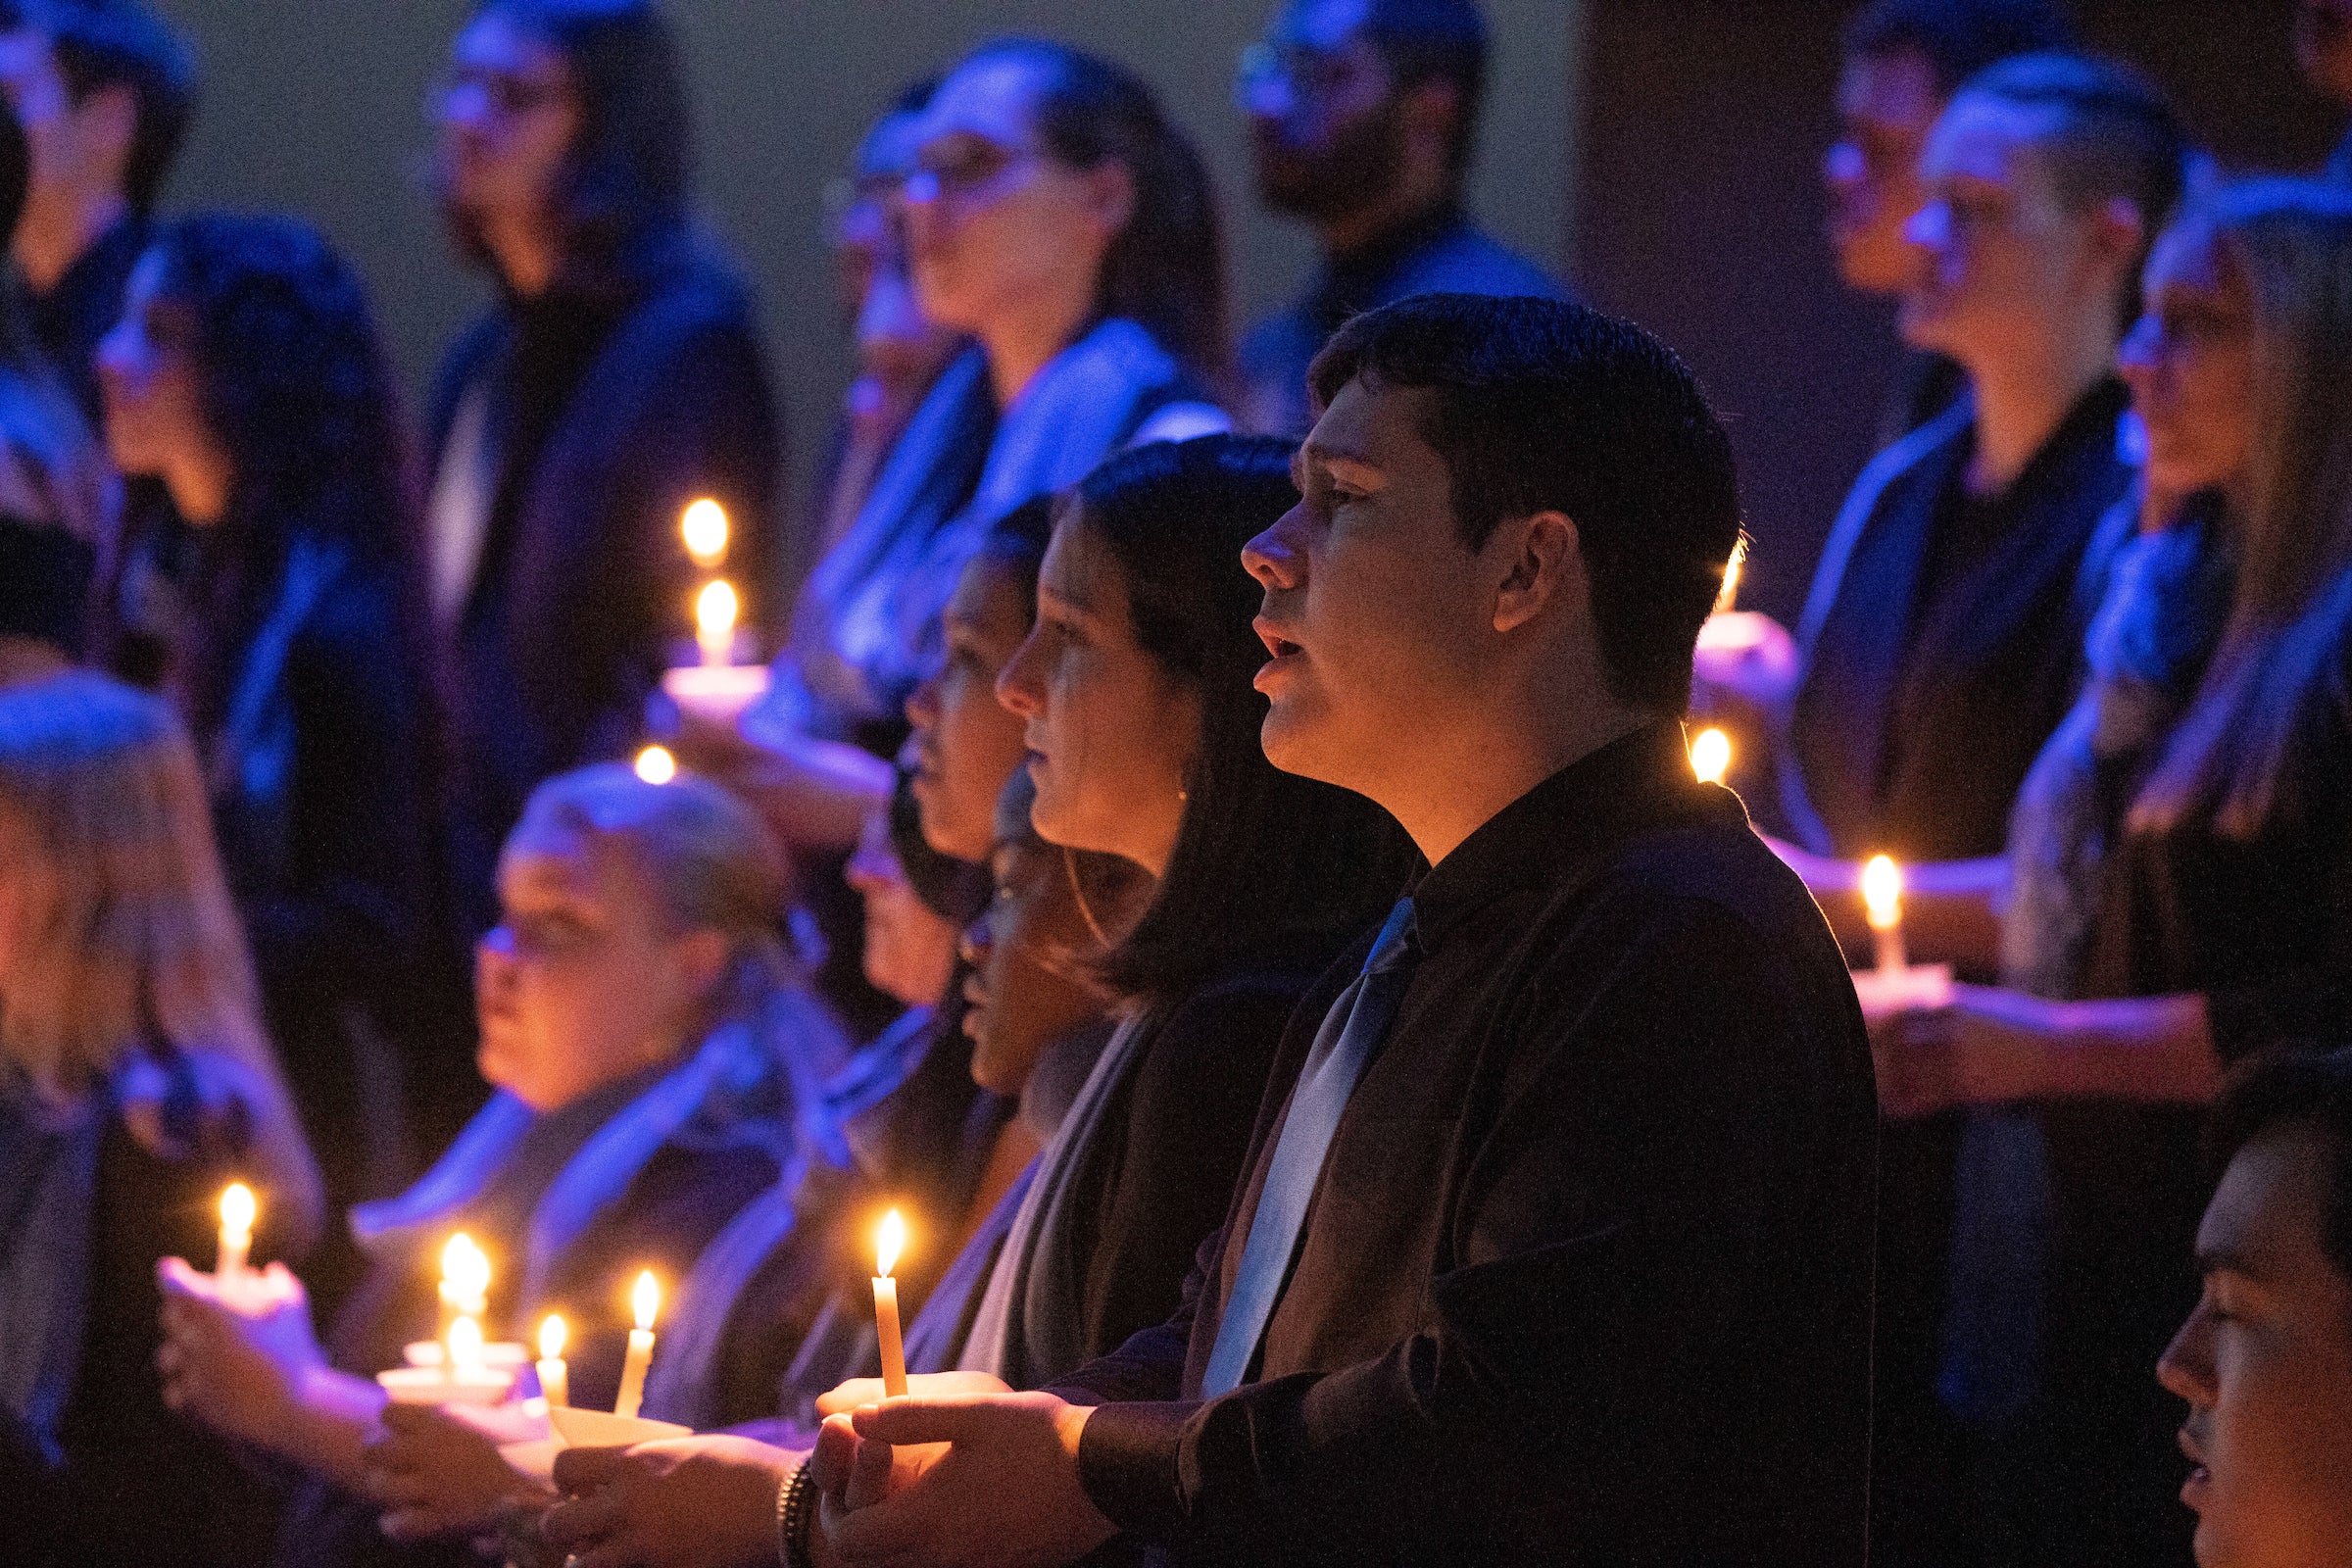 Choir sings while holding candles